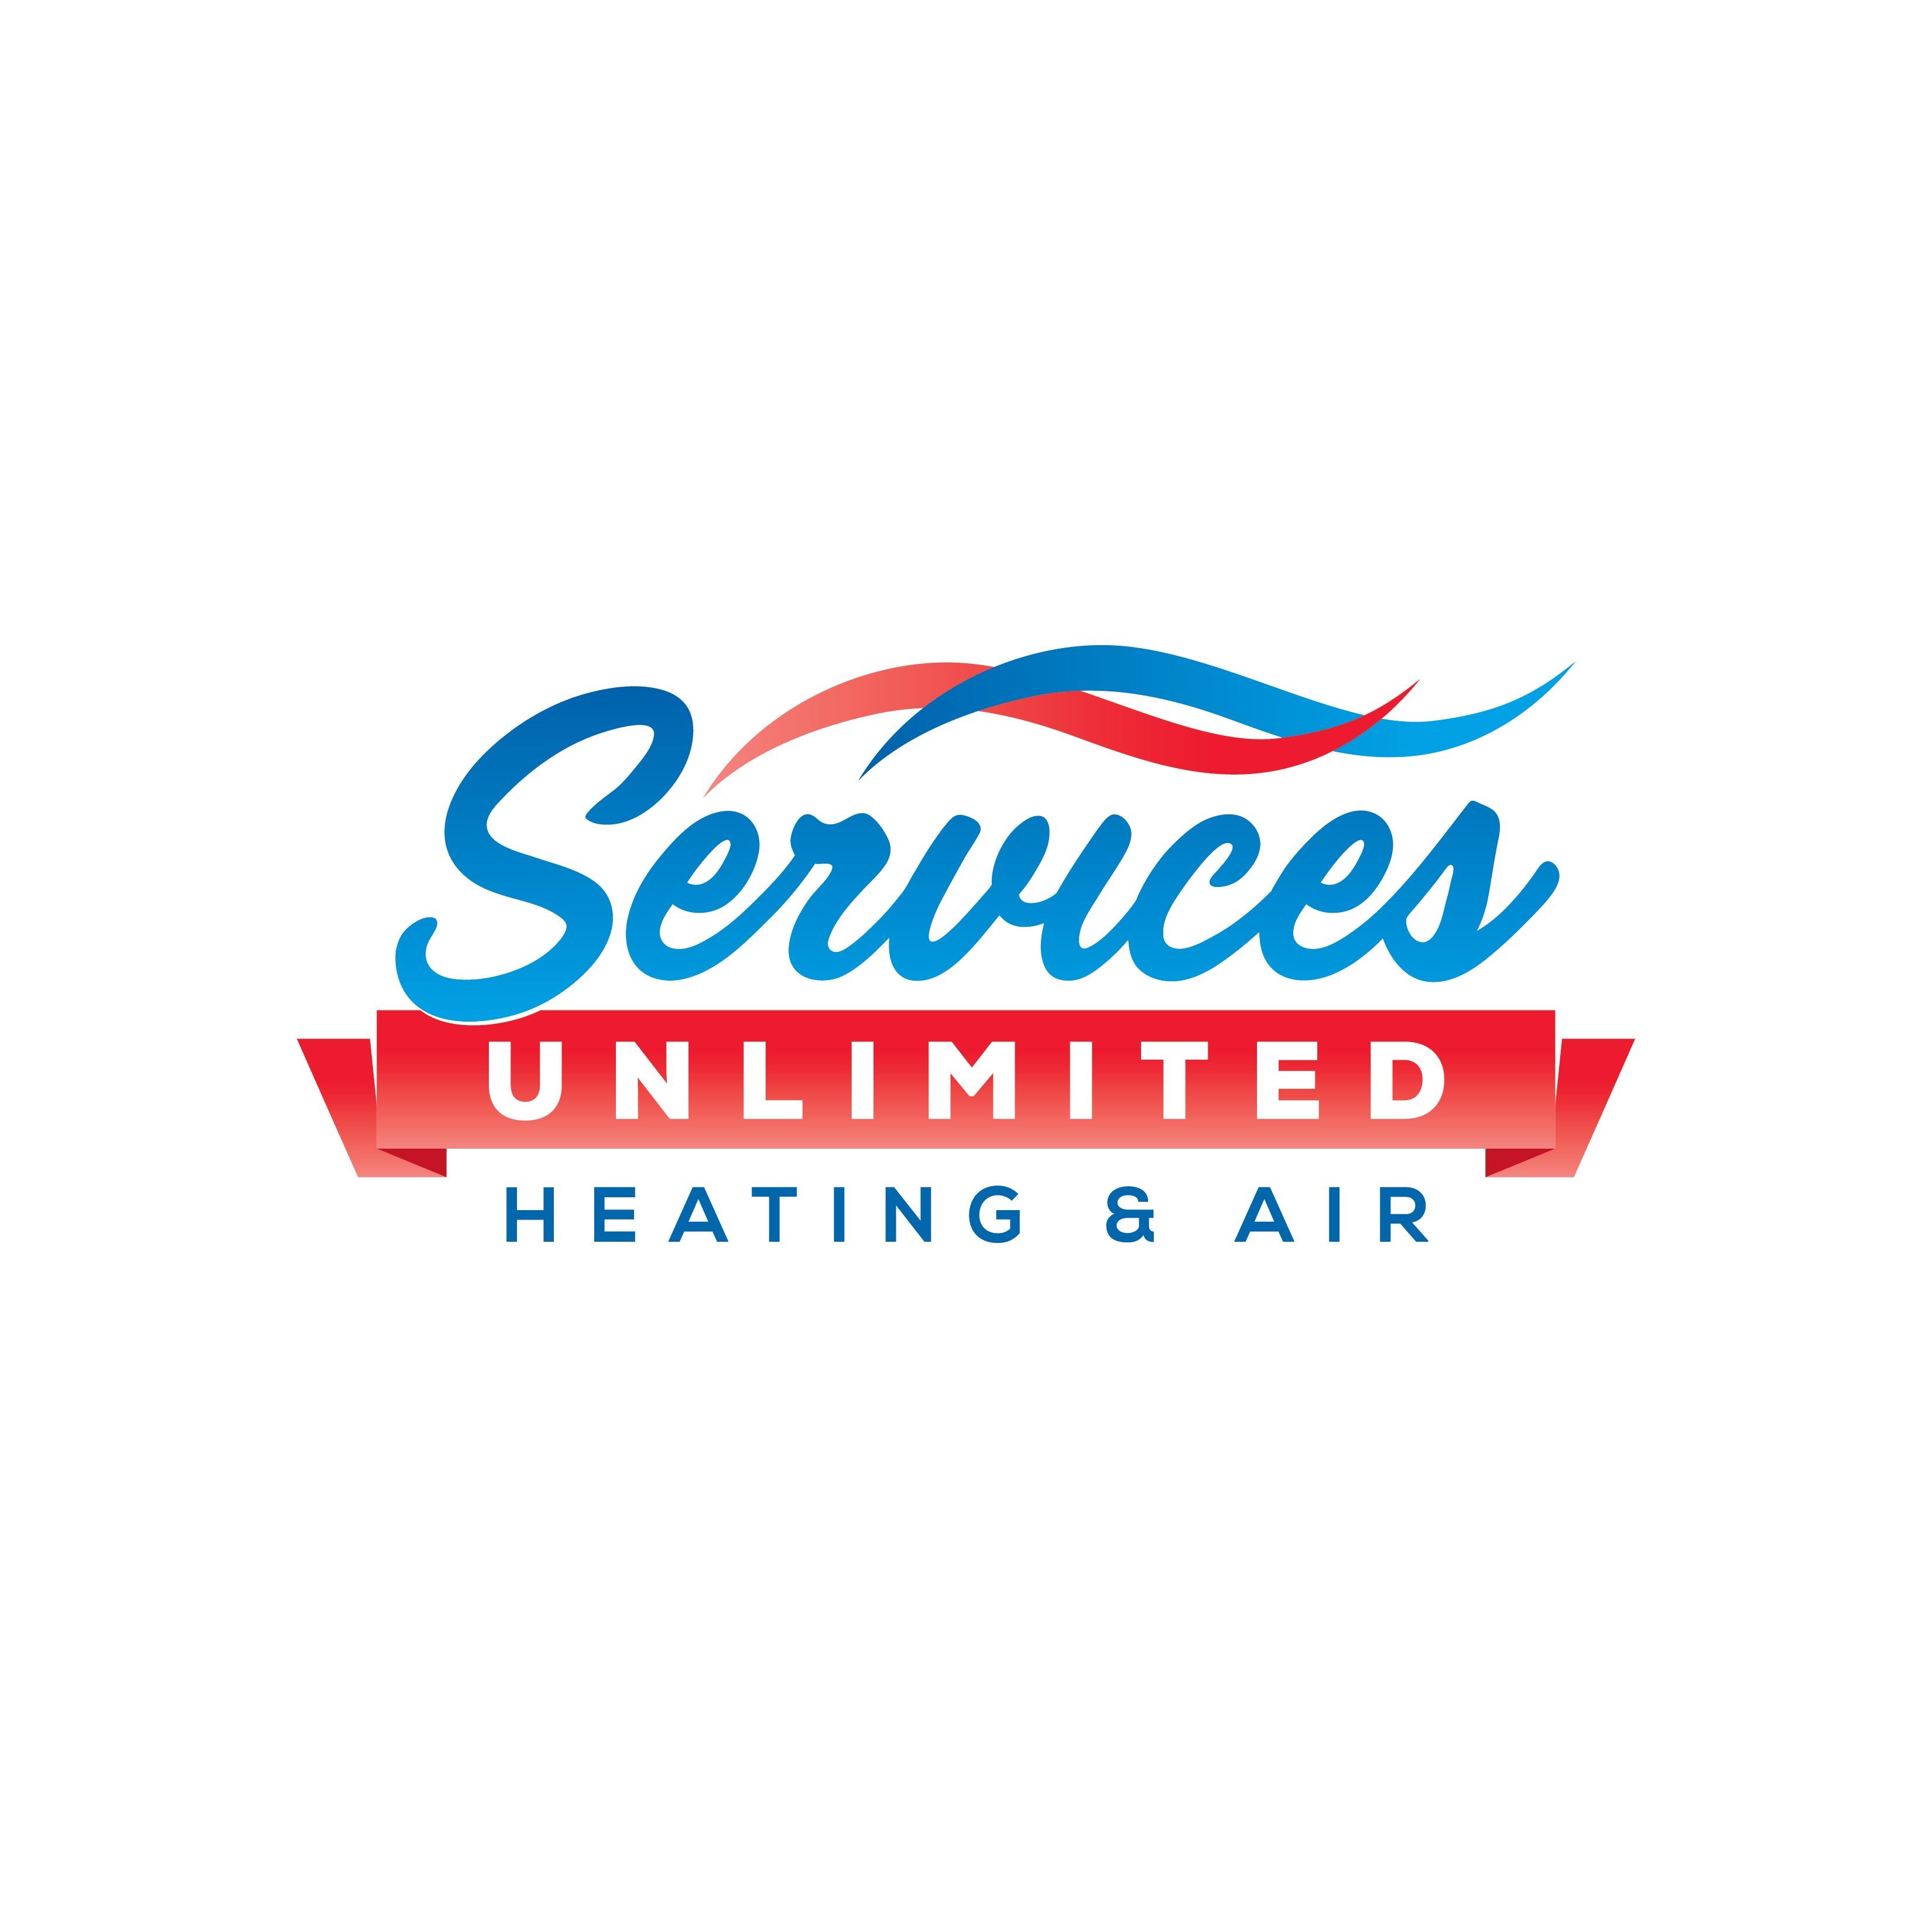 Services Unlimited Heating and Air, Inc. Logo